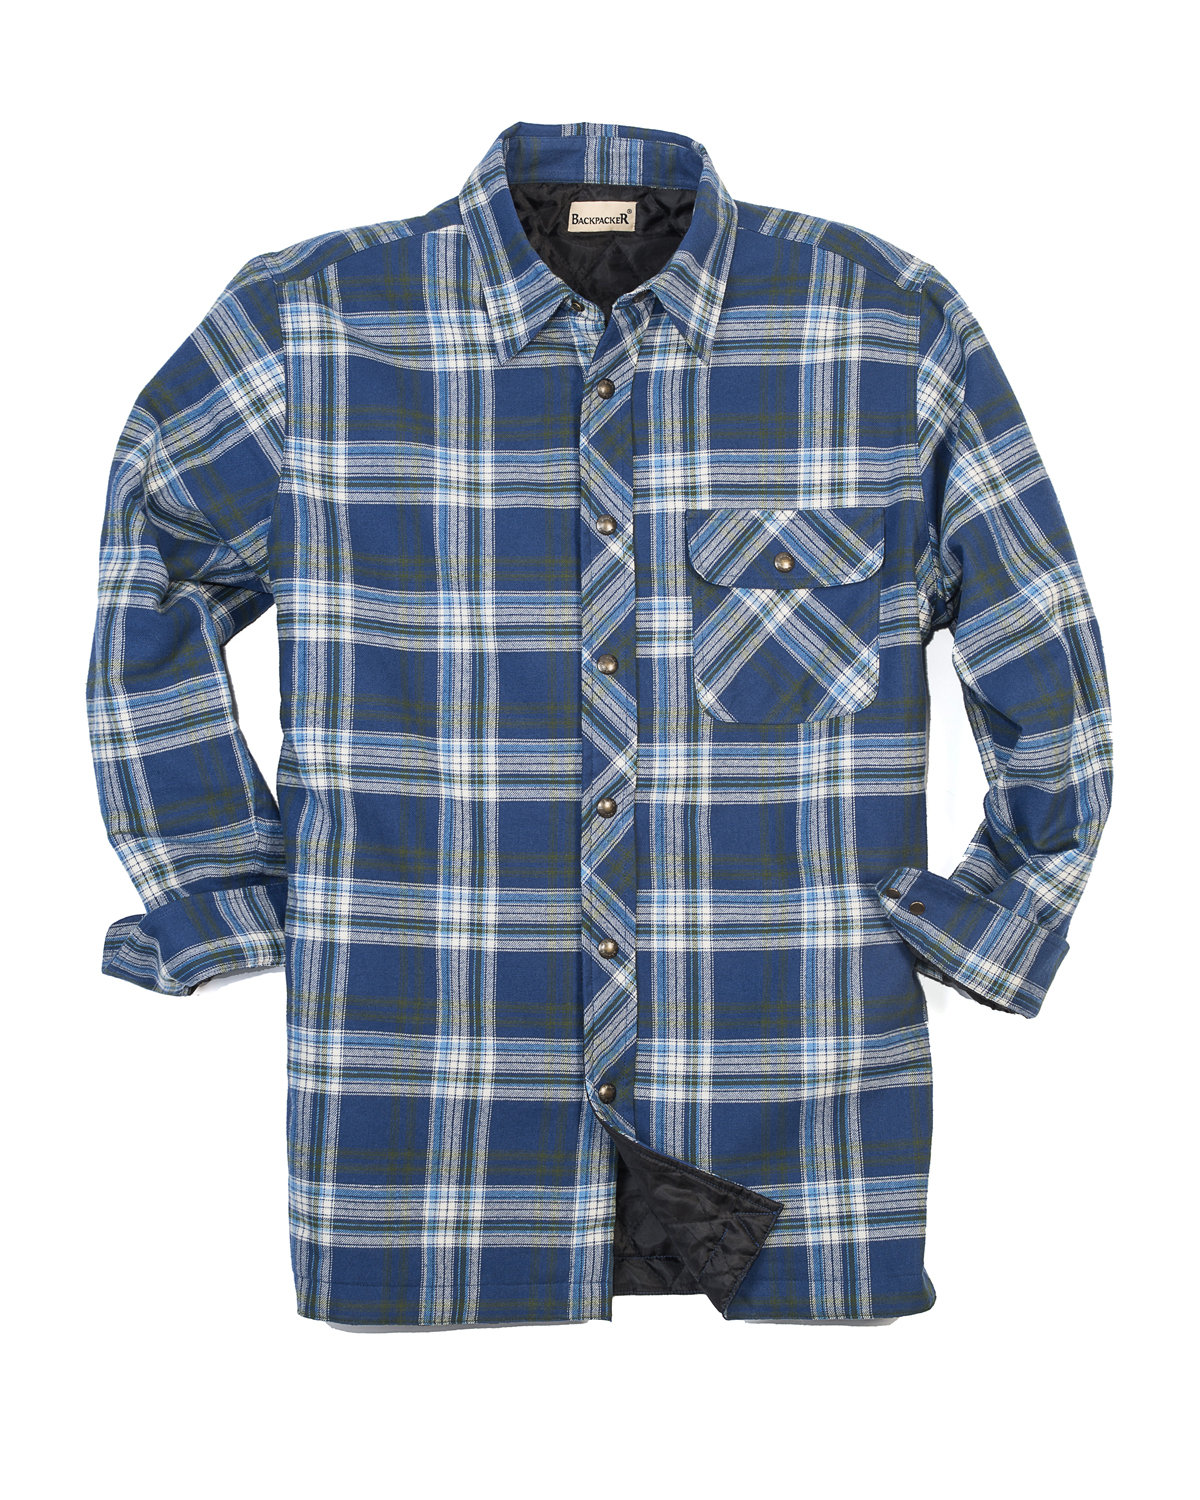 Backpacker Men's Tall Flannel Shirt Jacket with Quilt Lining | alphabroder